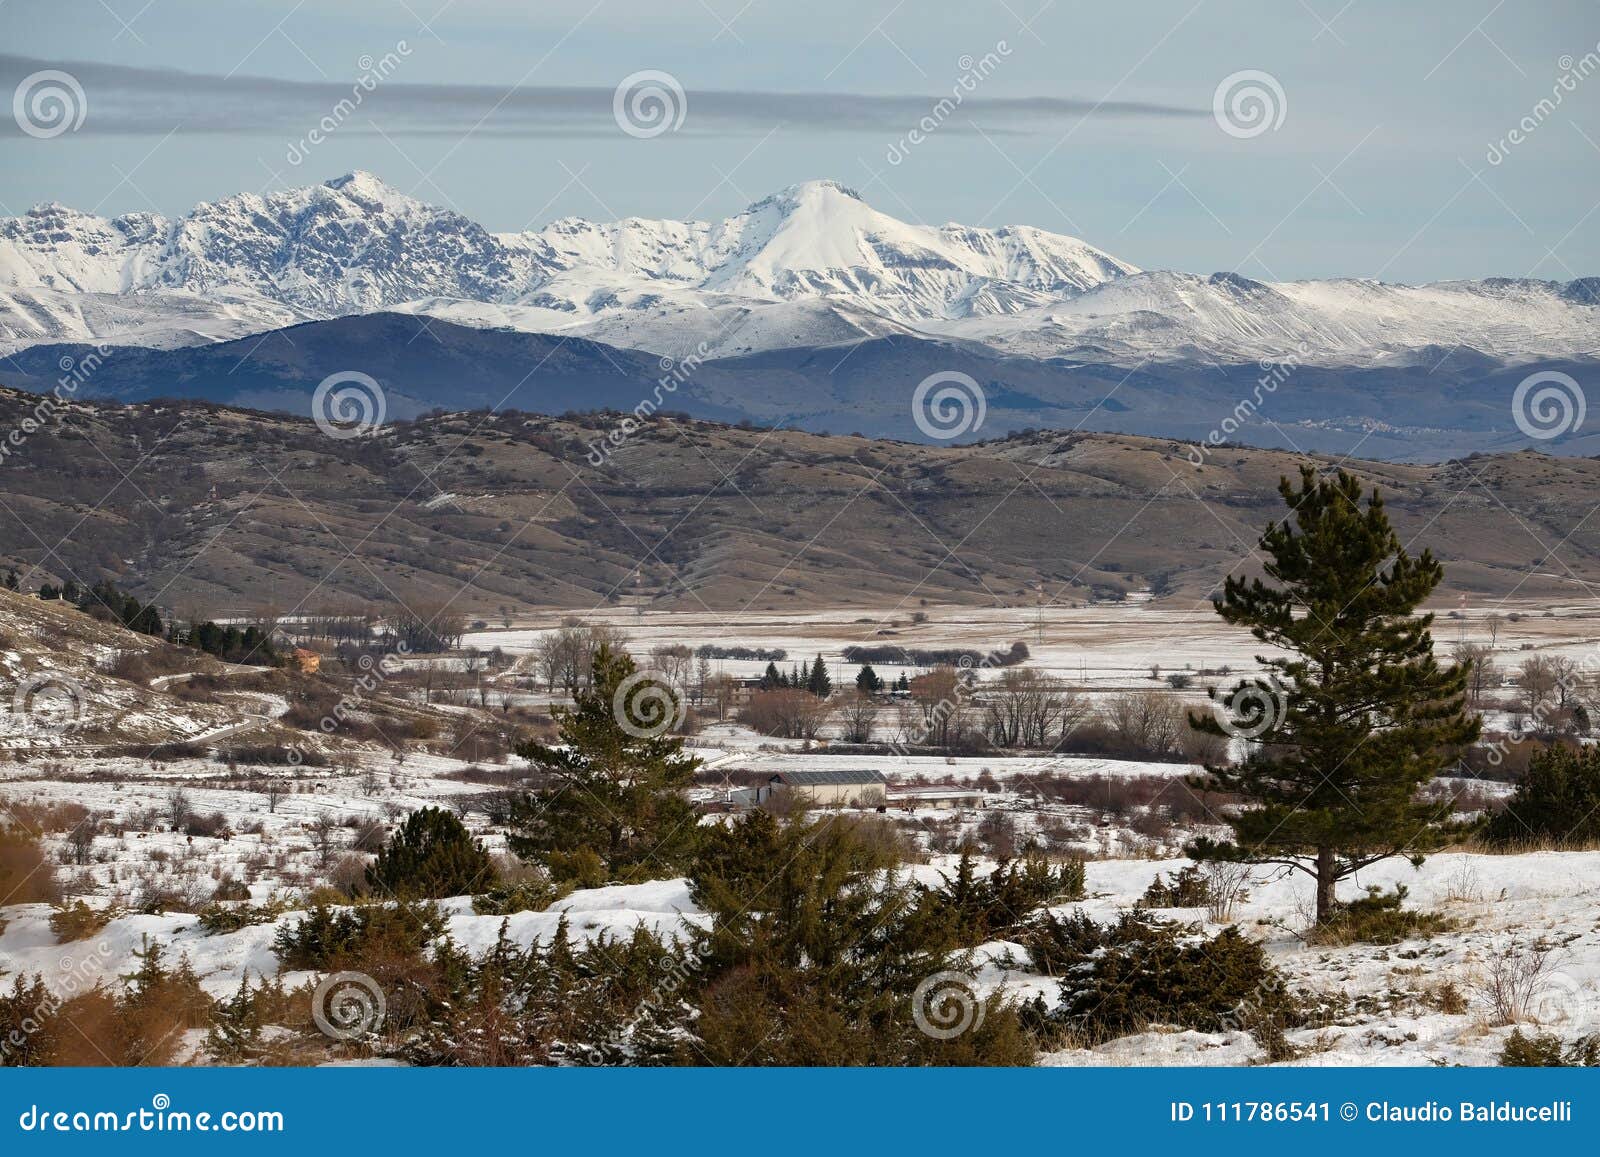 natural snowy landscape with mountains of gran sasso in the back